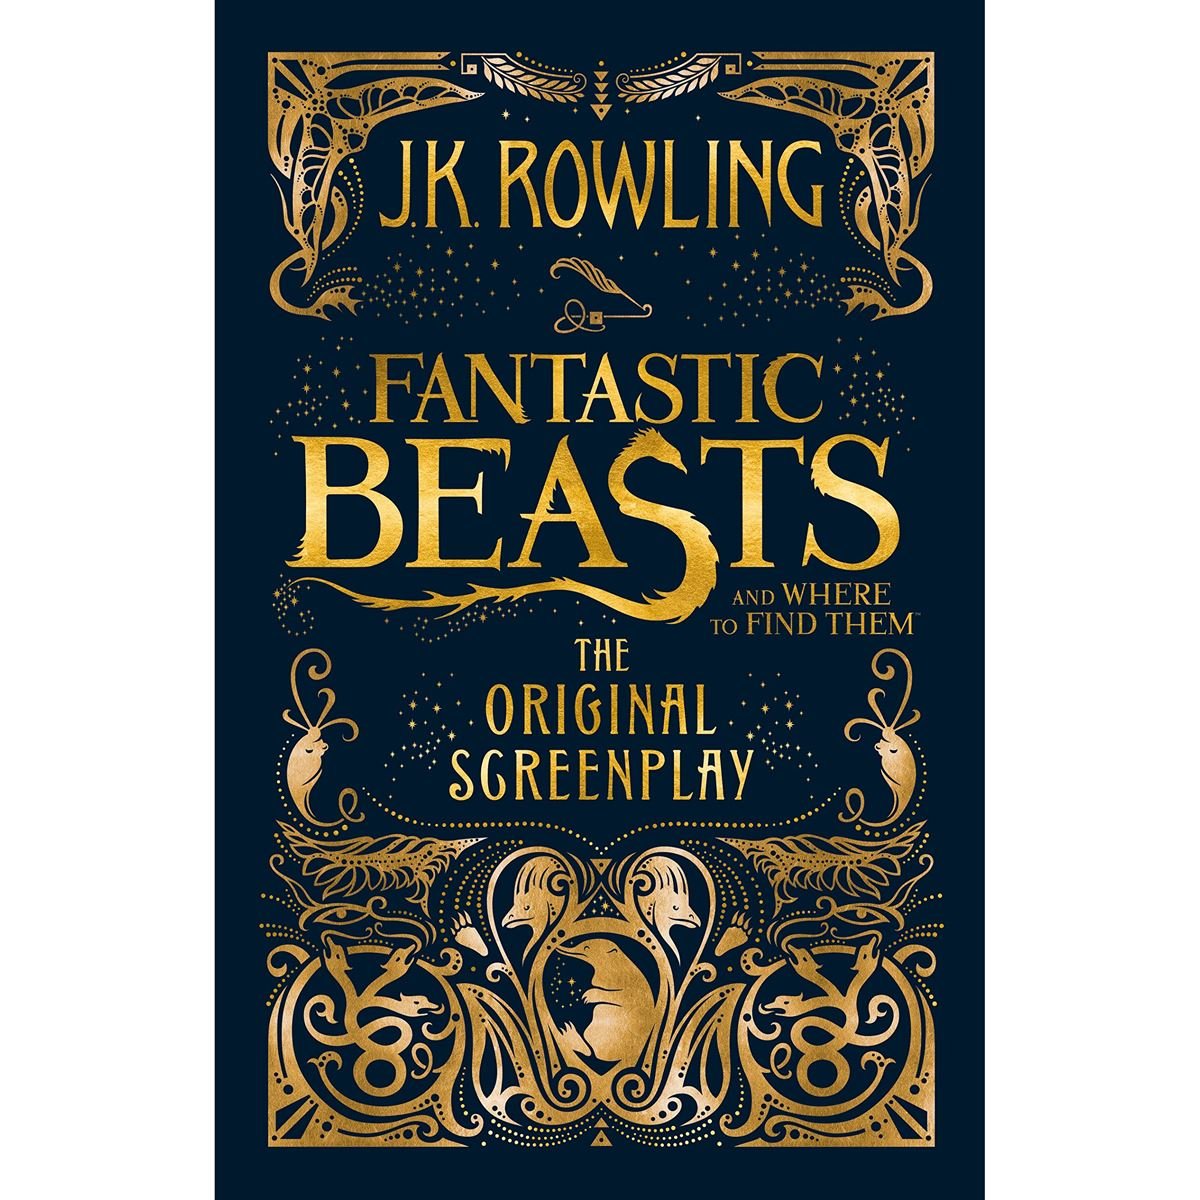 Fantastic Beasts And Where To Find Them (Original Screenplay)